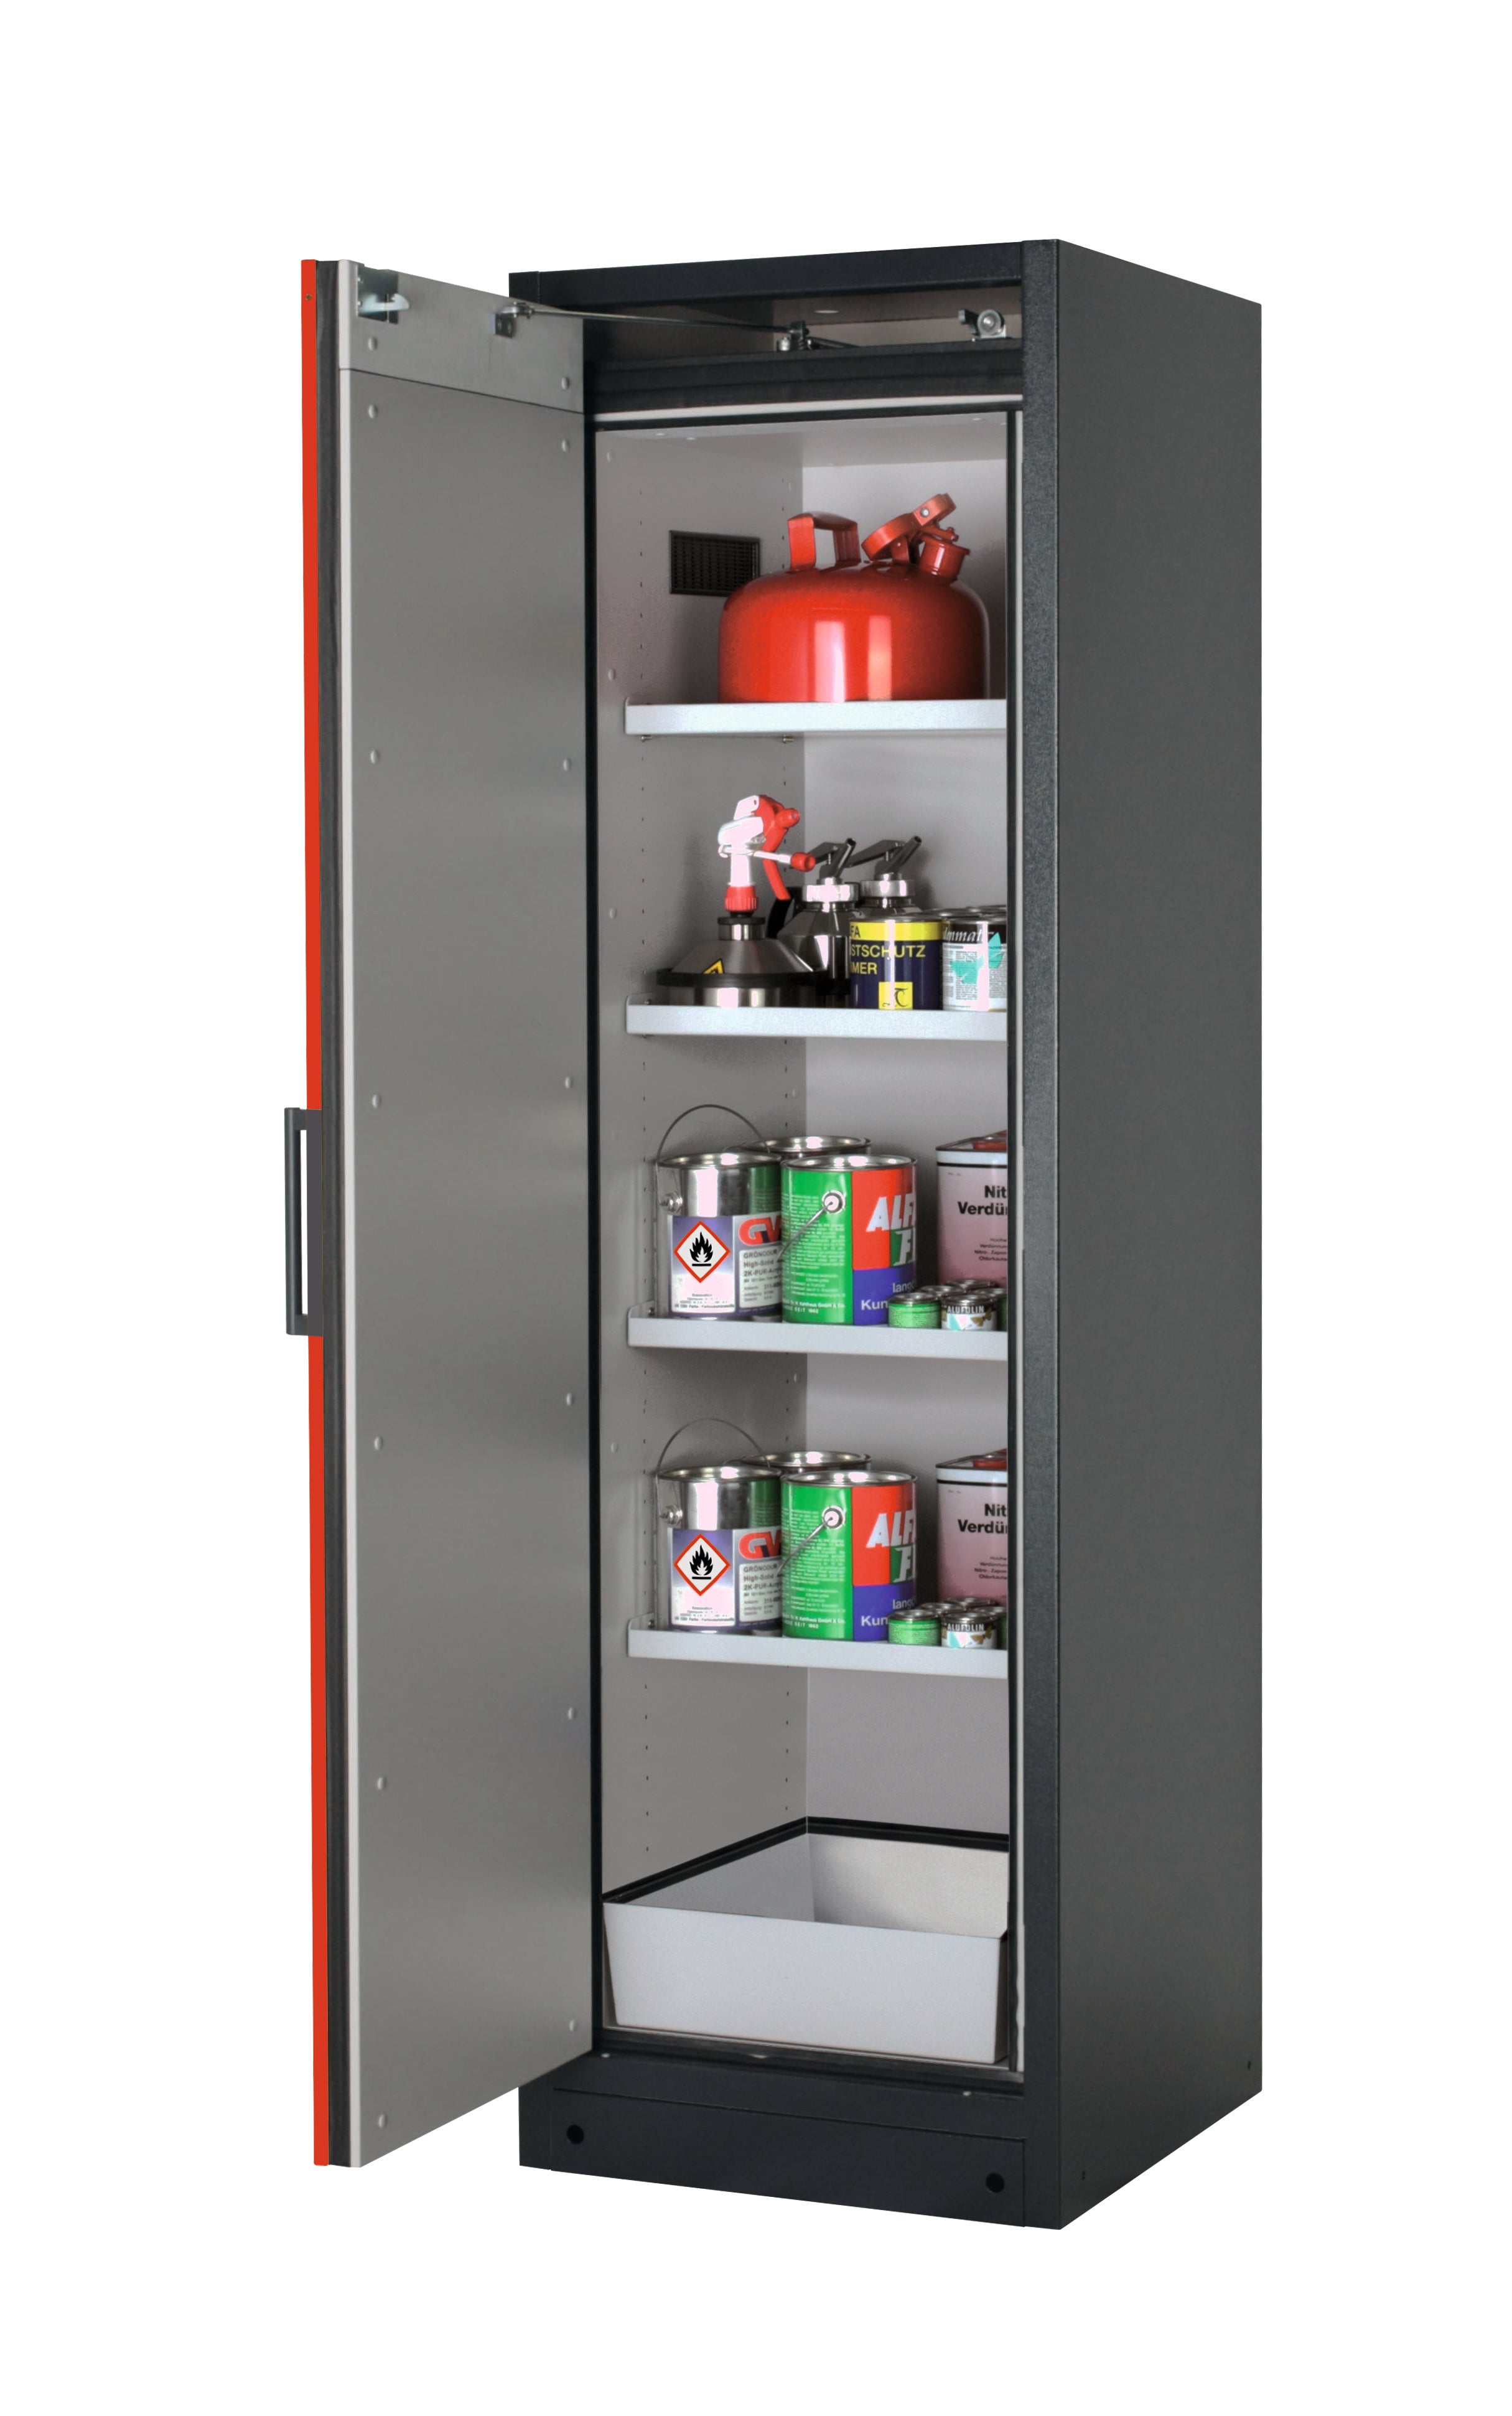 Type 90 safety storage cabinet Q-PEGASUS-90 model Q90.195.060.WDAC in traffic red RAL 3020 with 4x shelf standard (sheet steel),